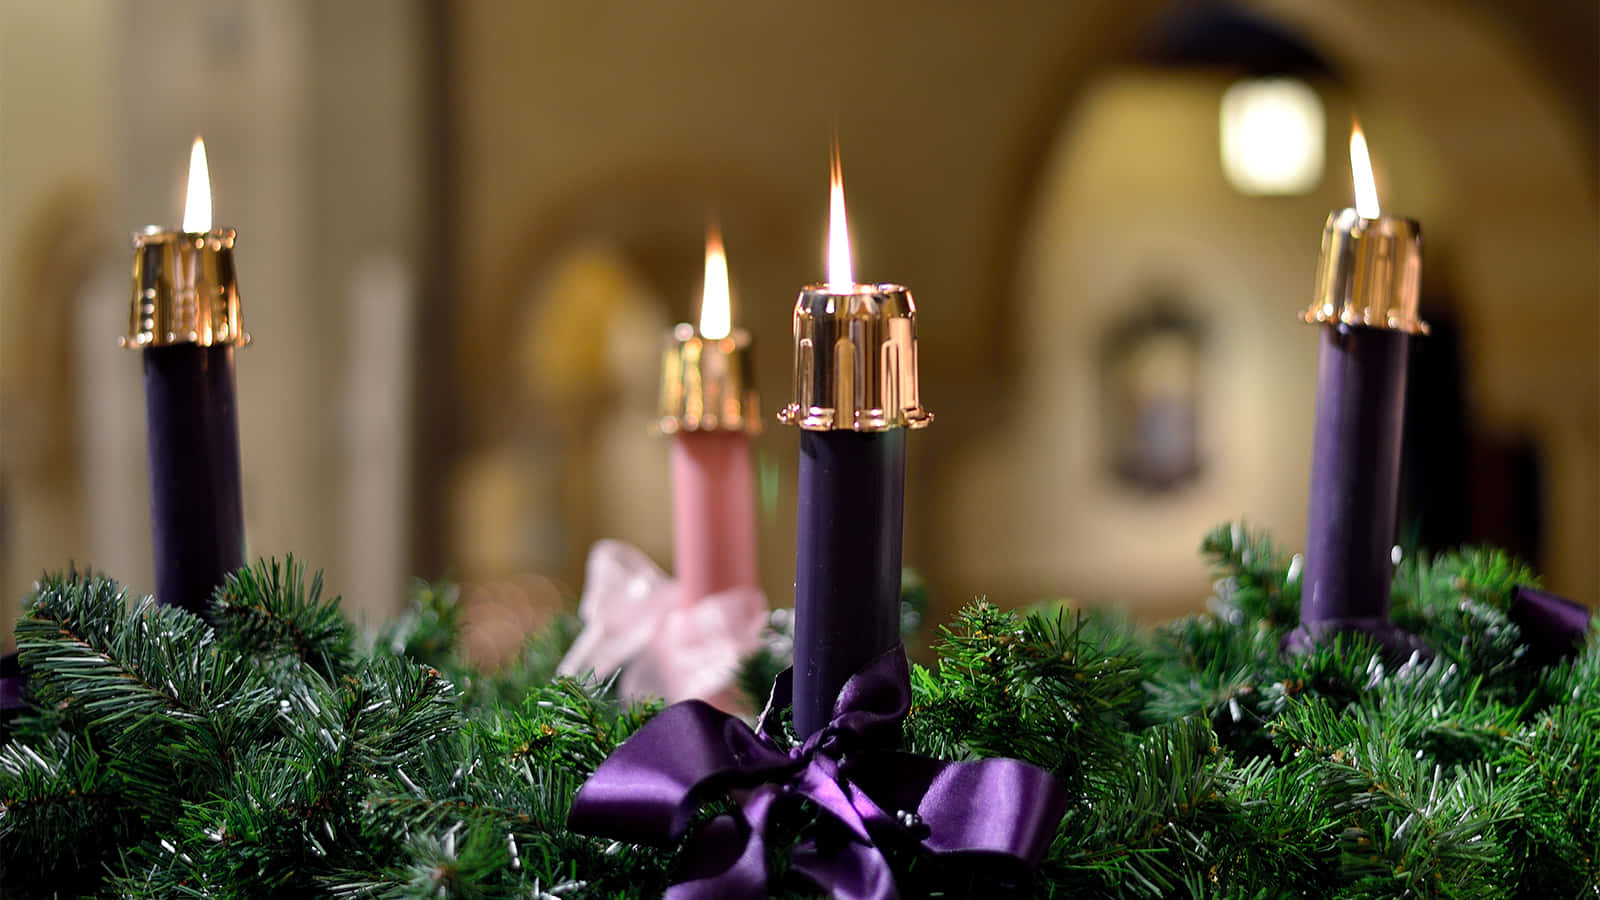 Rejoice During the Special Time of Advent